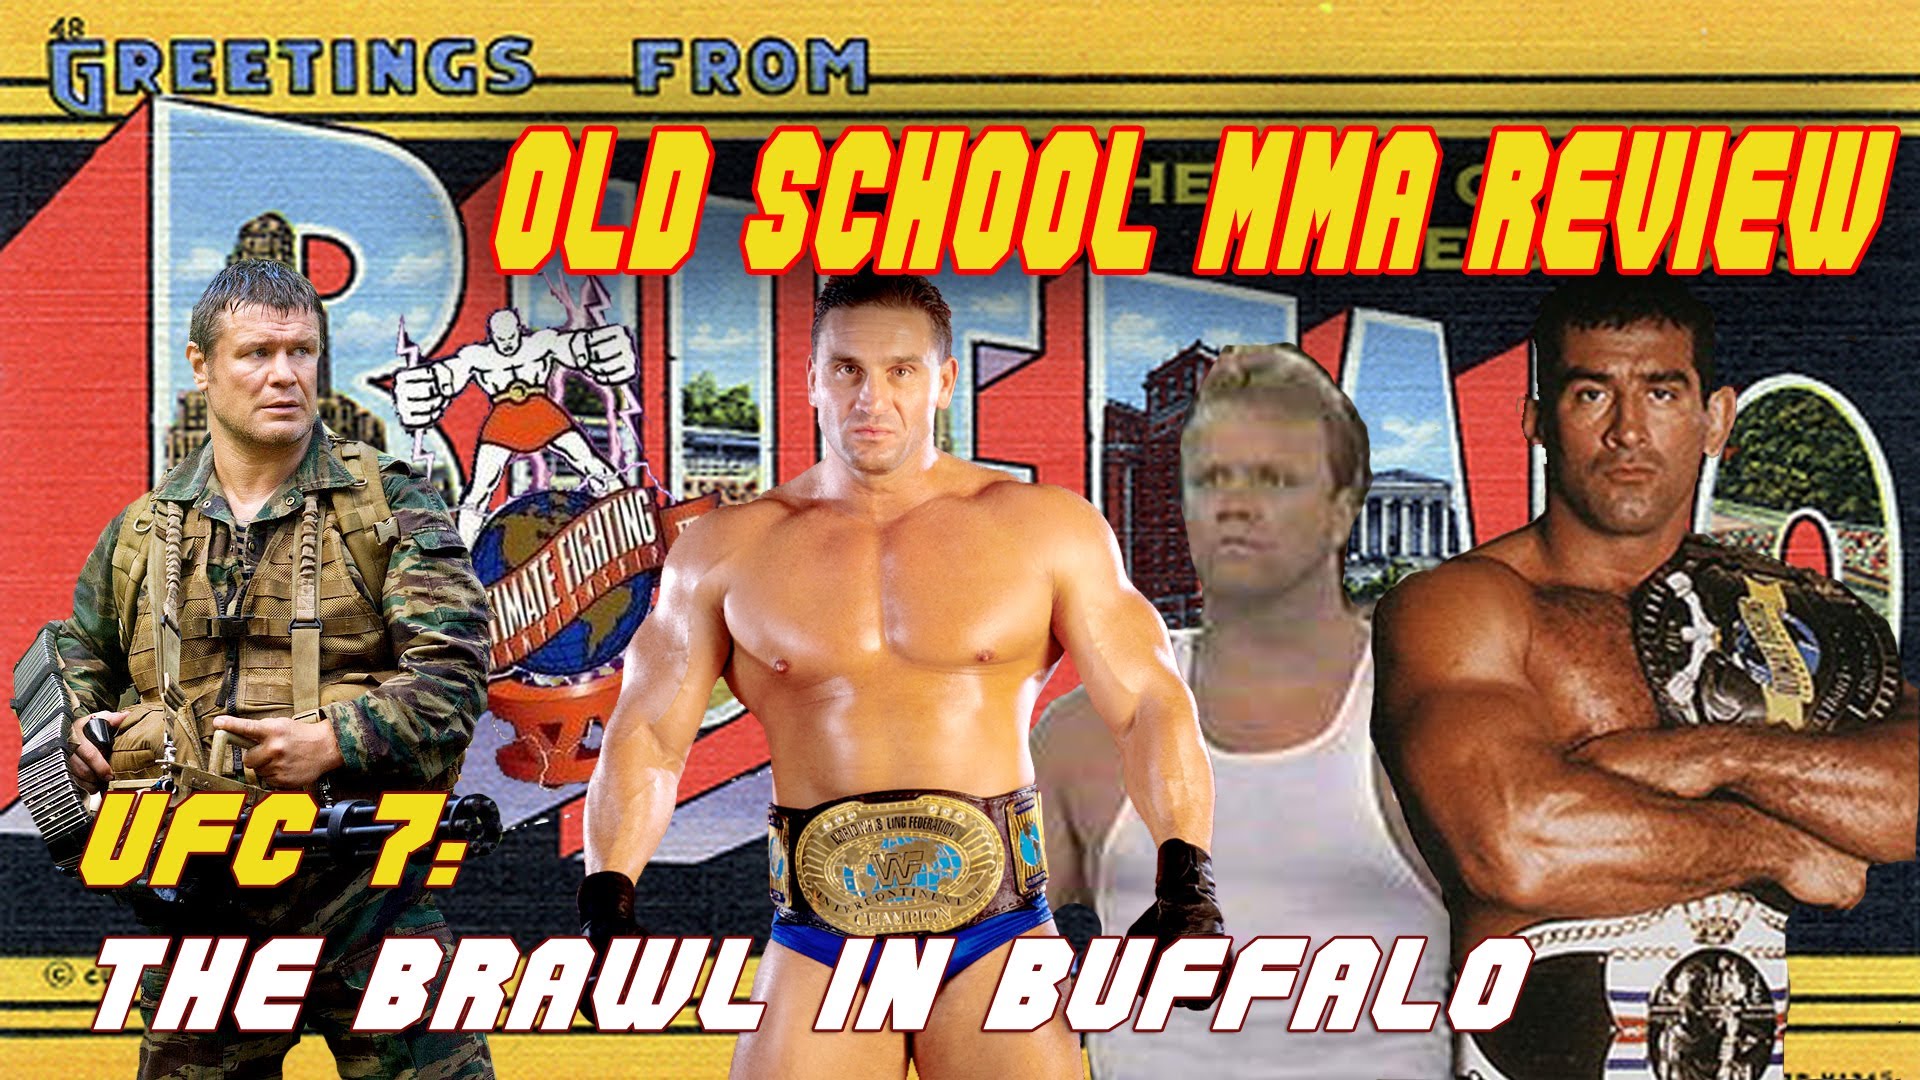 Old School MMA Review: UFC 7 - The Brawl in Buffalo MMA Video1920 x 1080